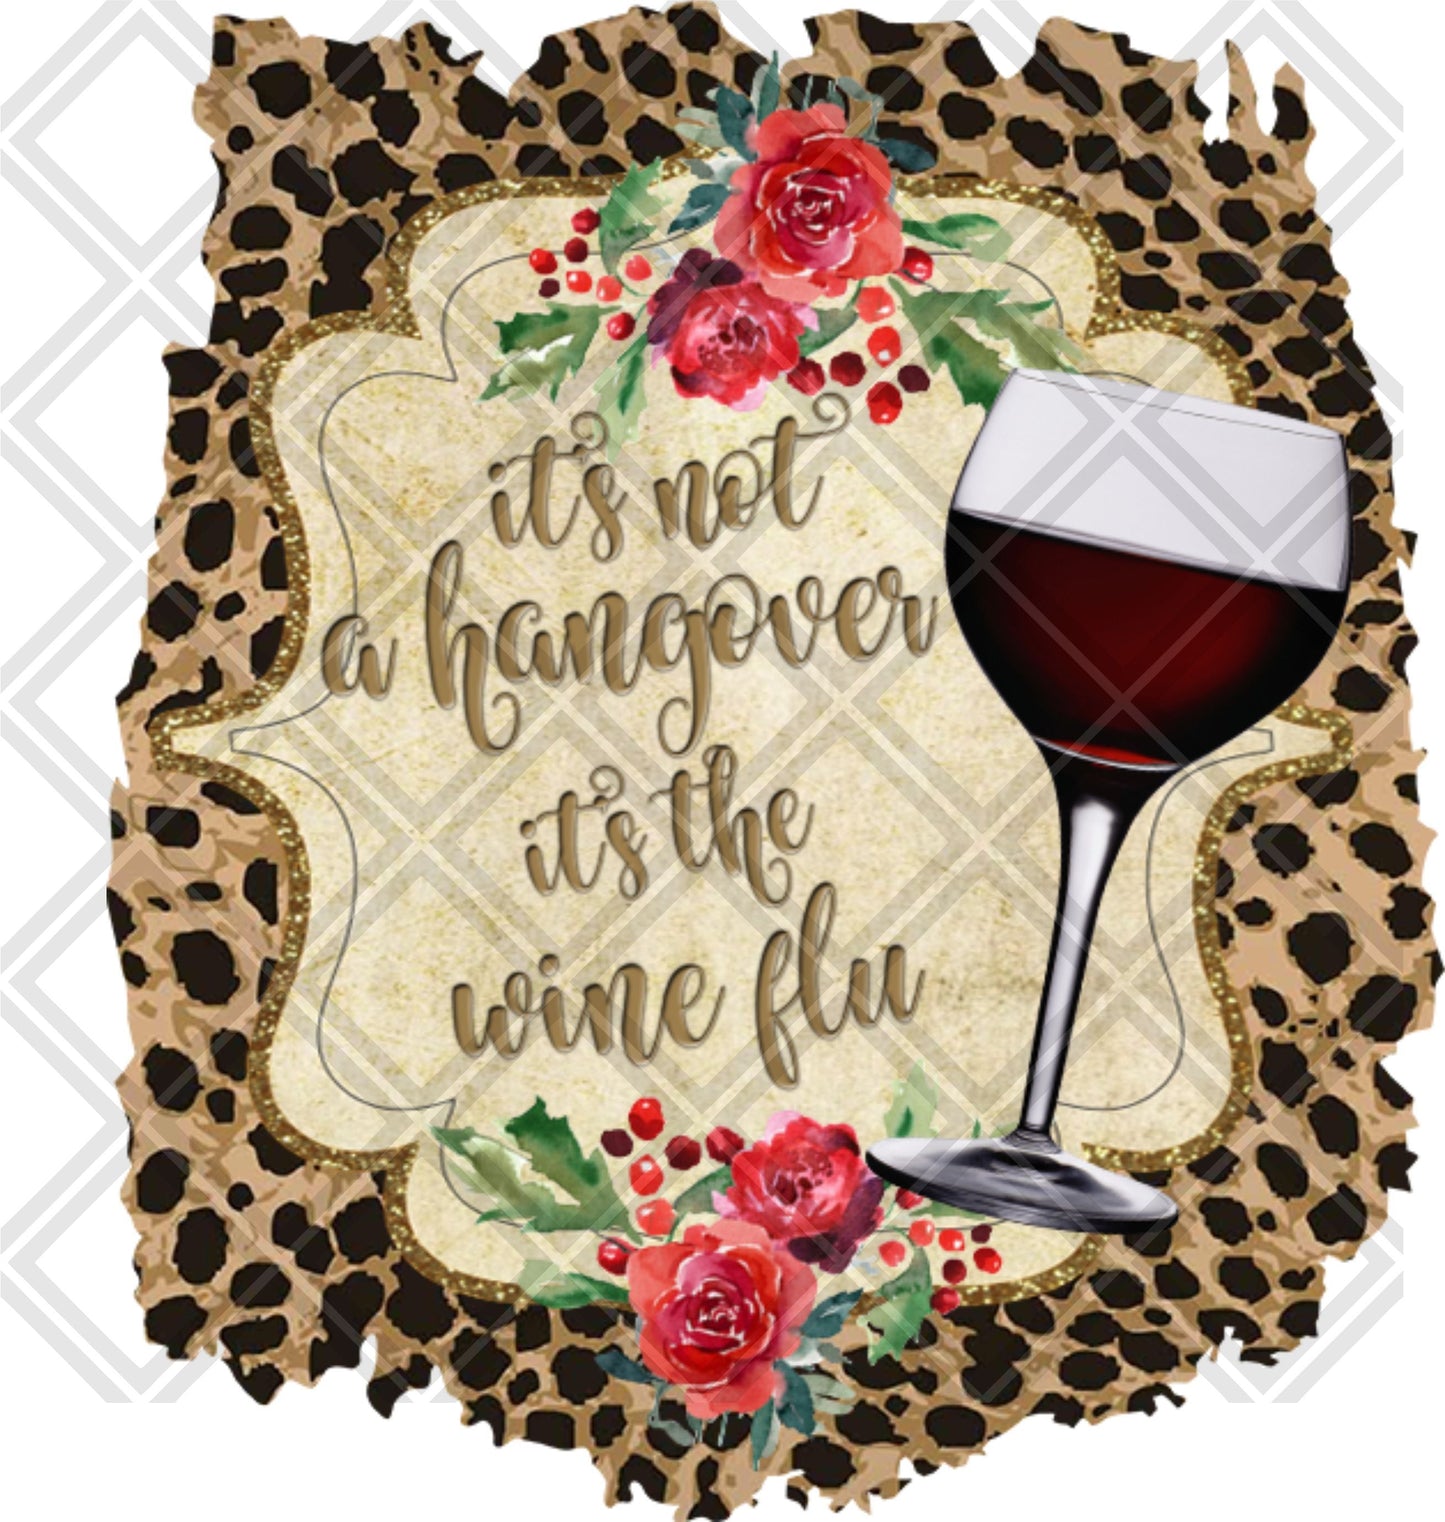 Its Not A Hangover Its The Wine Flu 2 DTF TRANSFERPRINT TO ORDER